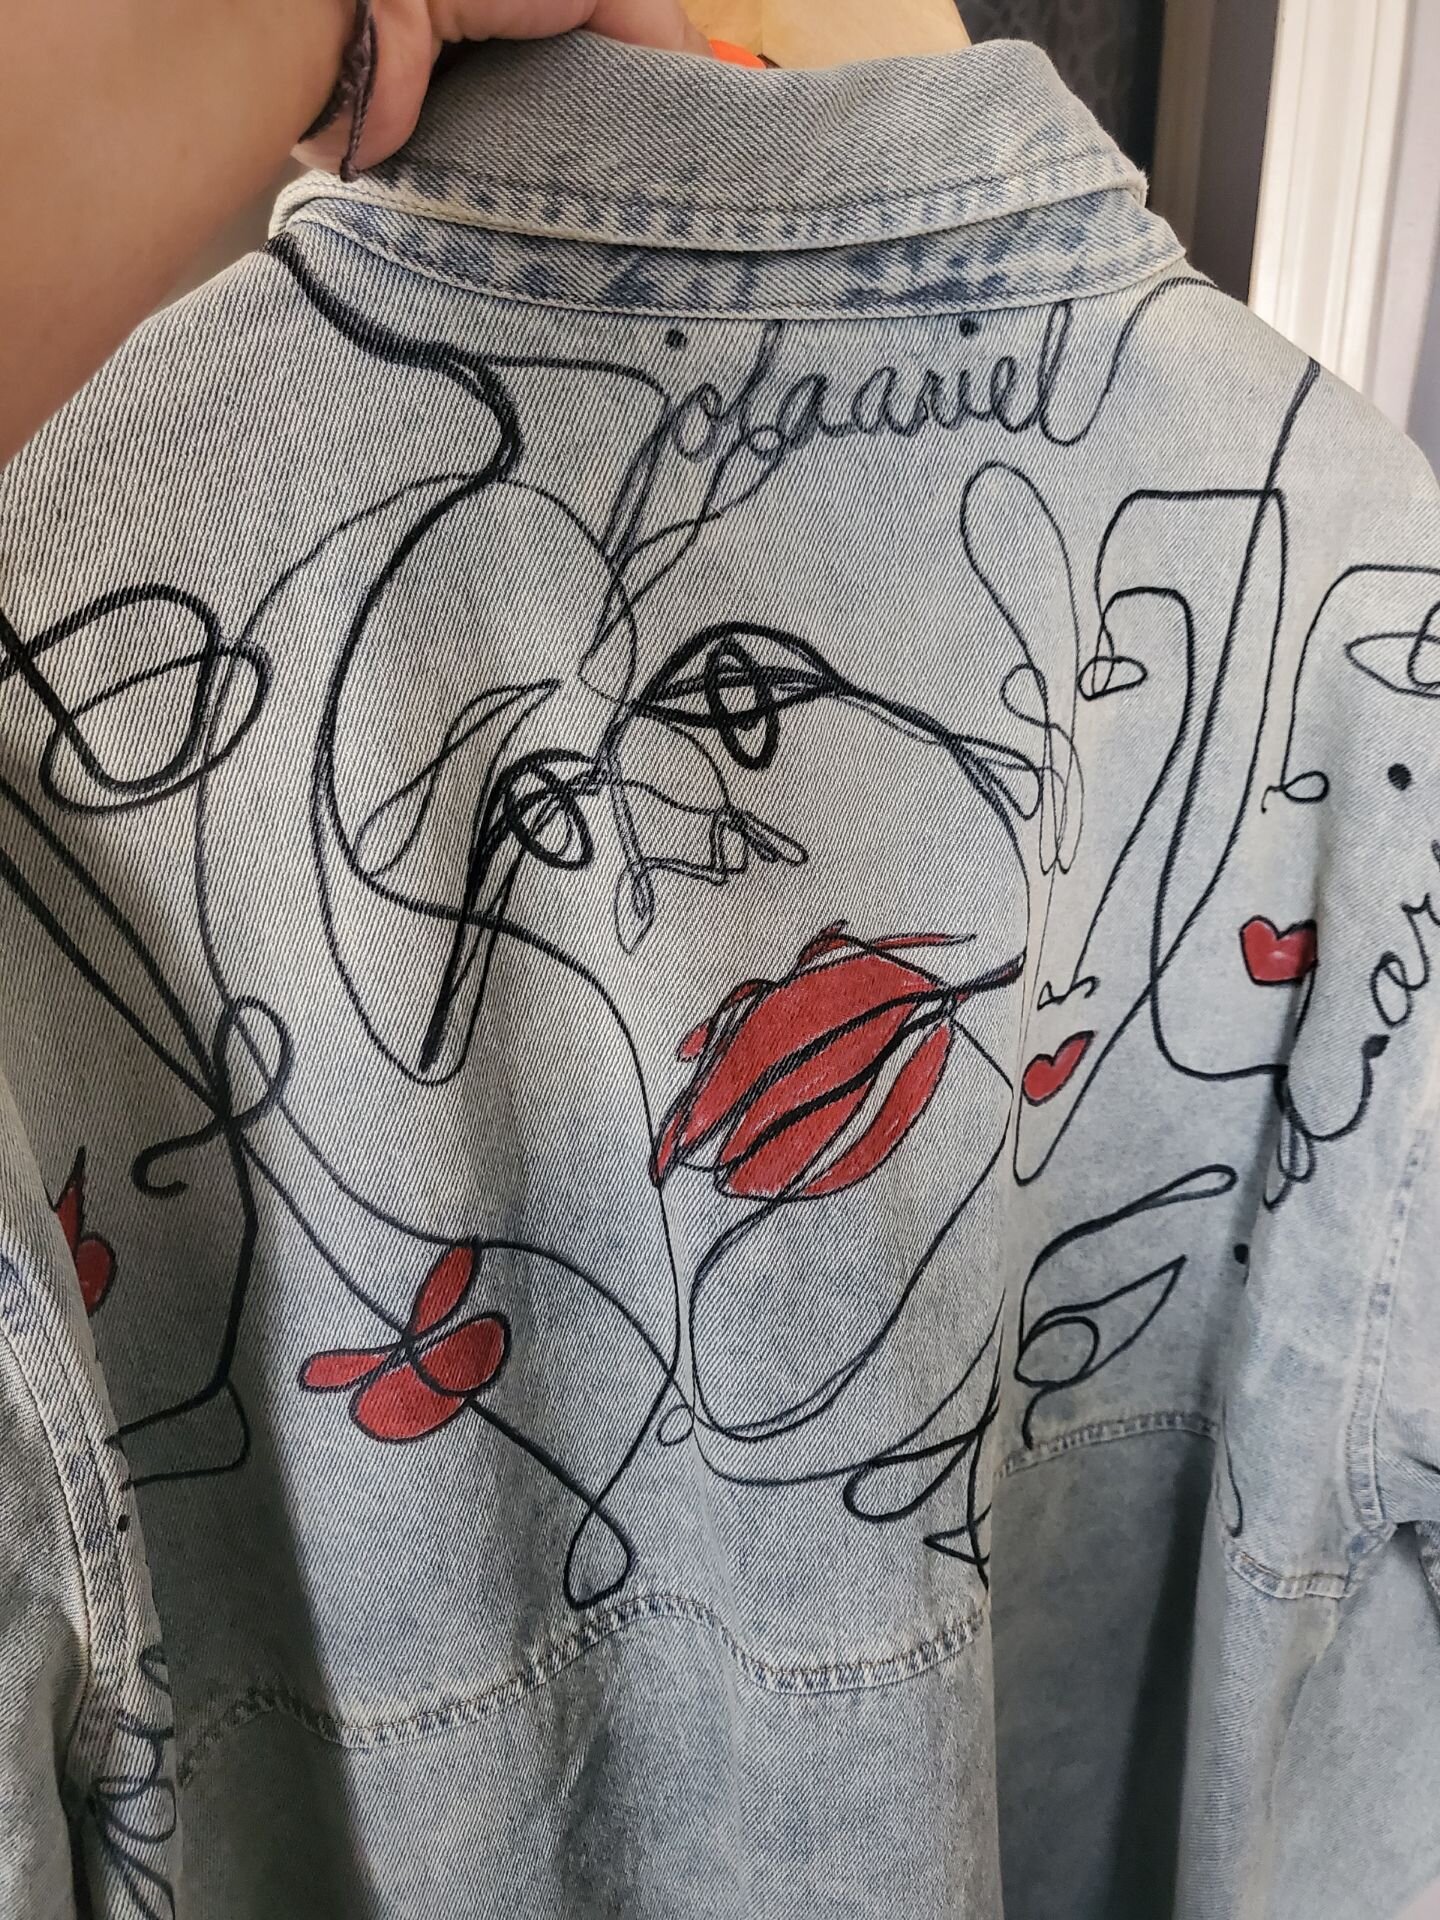 Jordan Latham​​​​​​​ began Jola Ariel Art & Boutique by painting her designs onto denim and transferring them to other clothing using a vinyl heat press.